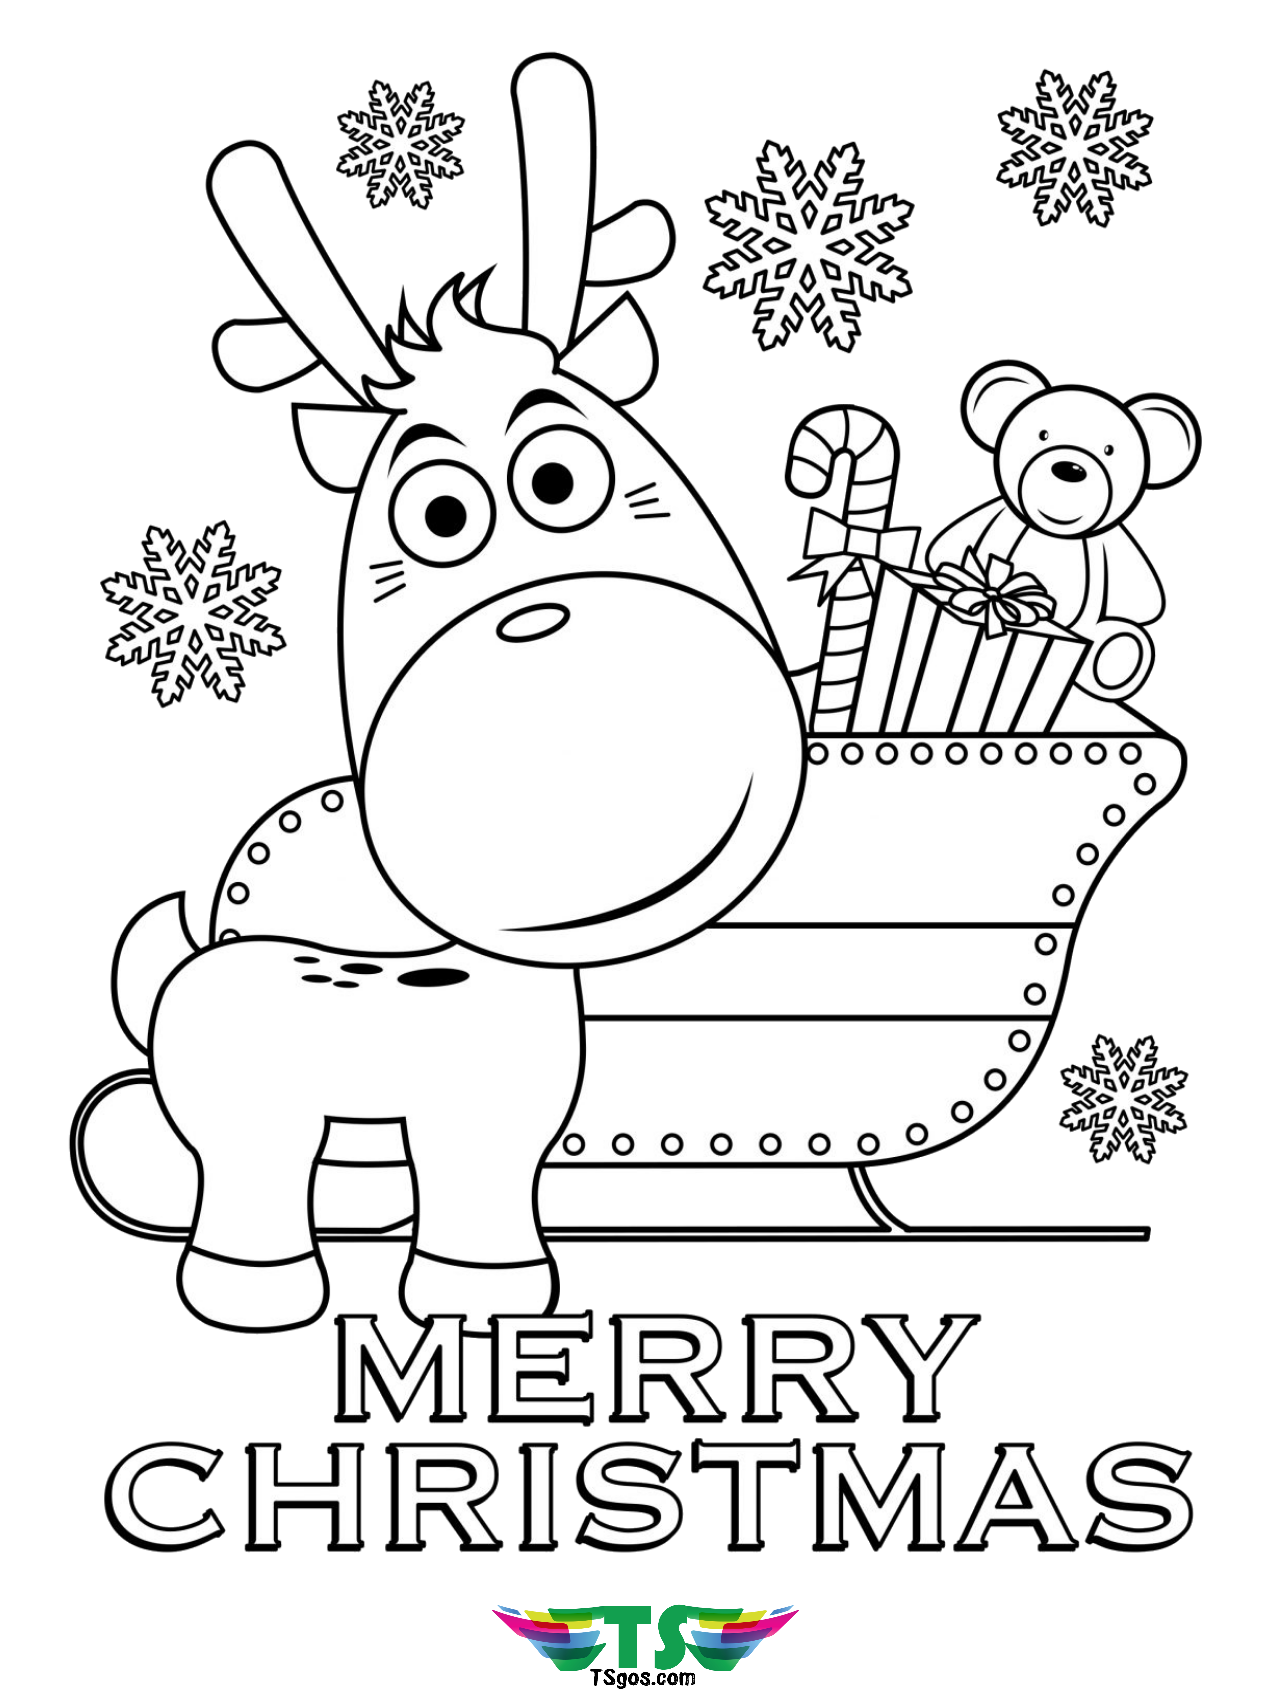 Merry christmas cartoon coloring page.